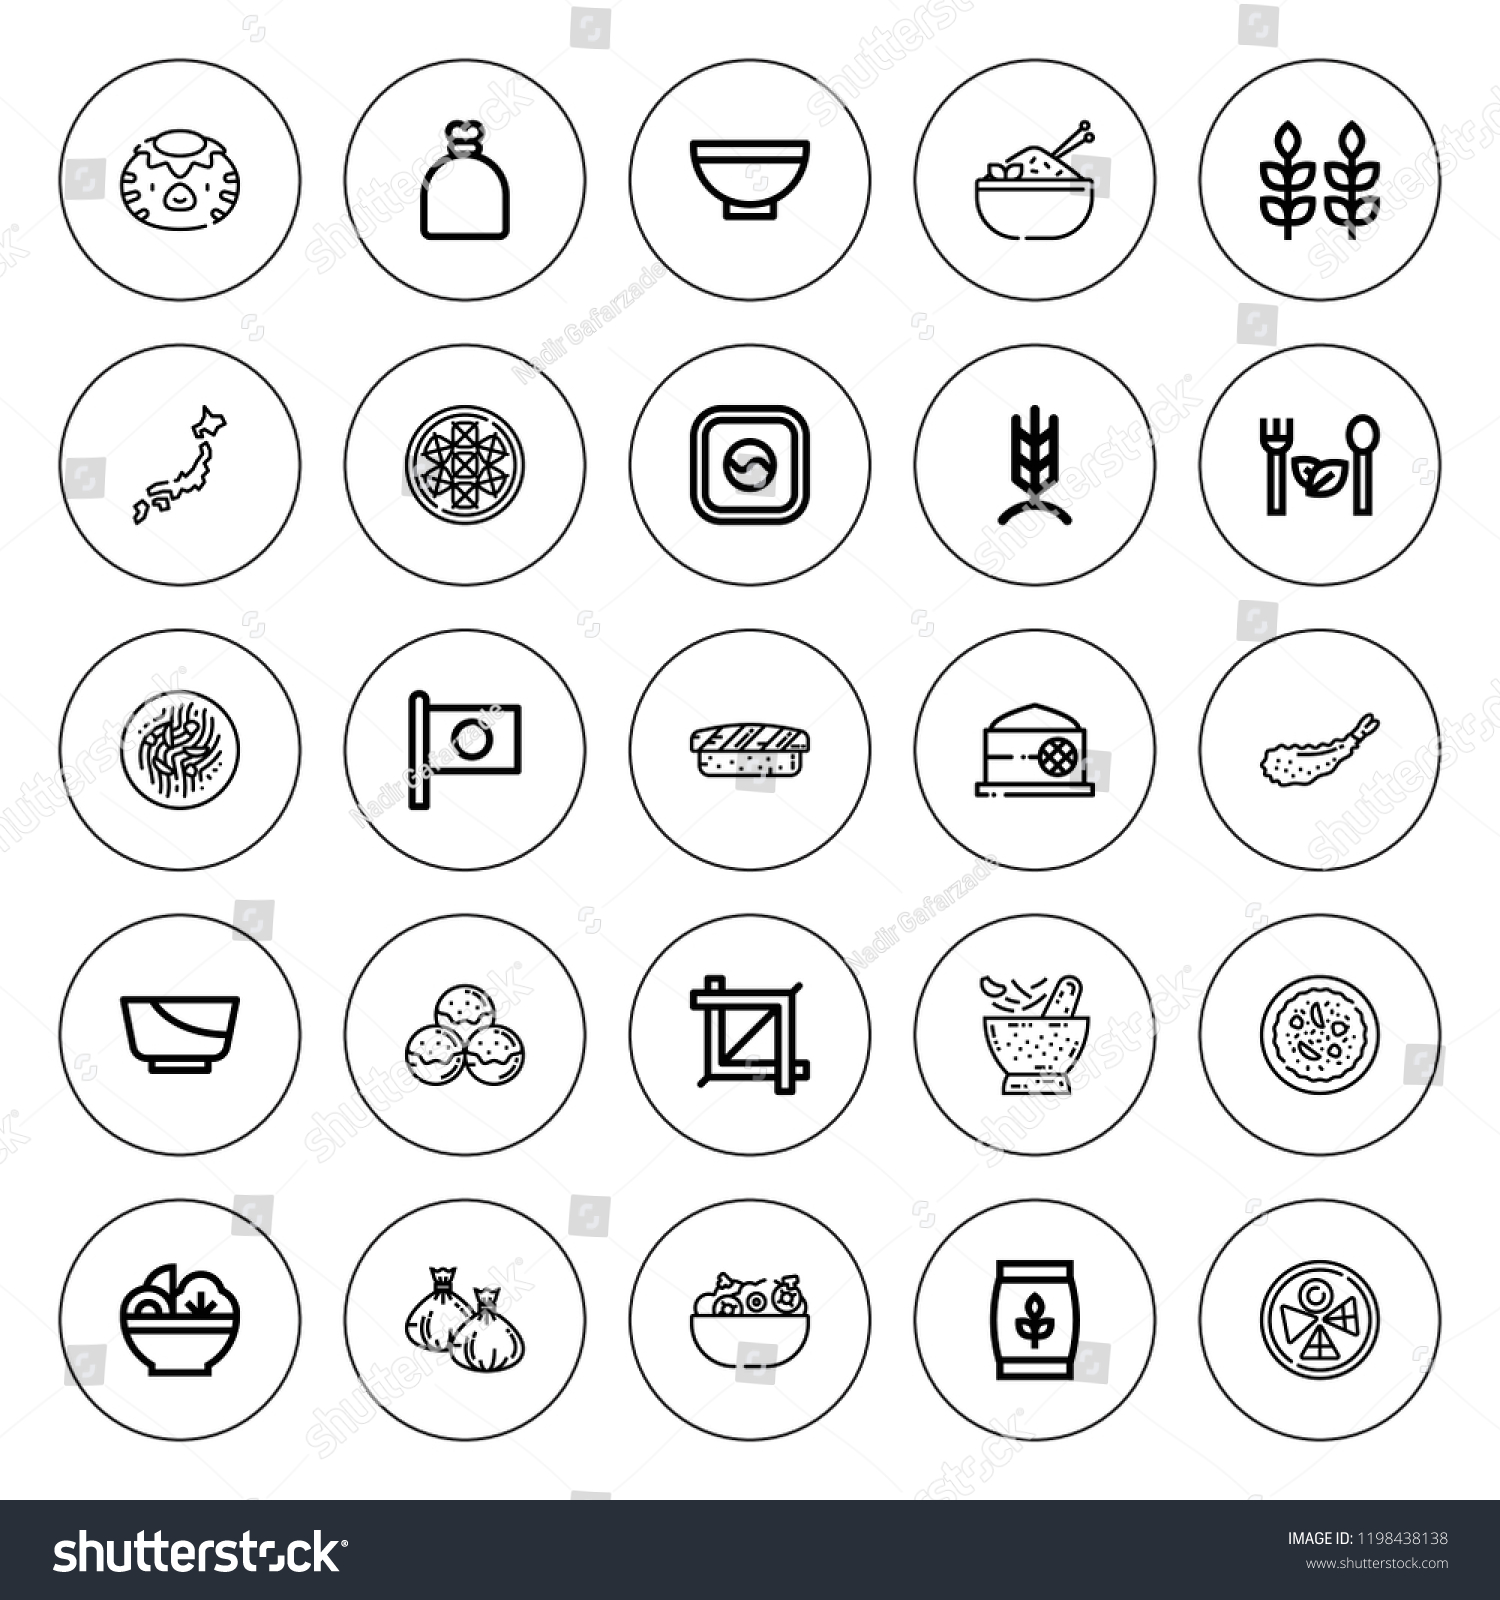 SVG of Rice icon set. collection of 25 outline rice icons with bowl, chow mein, dumpling, crop, kappa, grain, japan, rice, rye, sack, takoyaki, sushi, salad icons. editable icons. svg